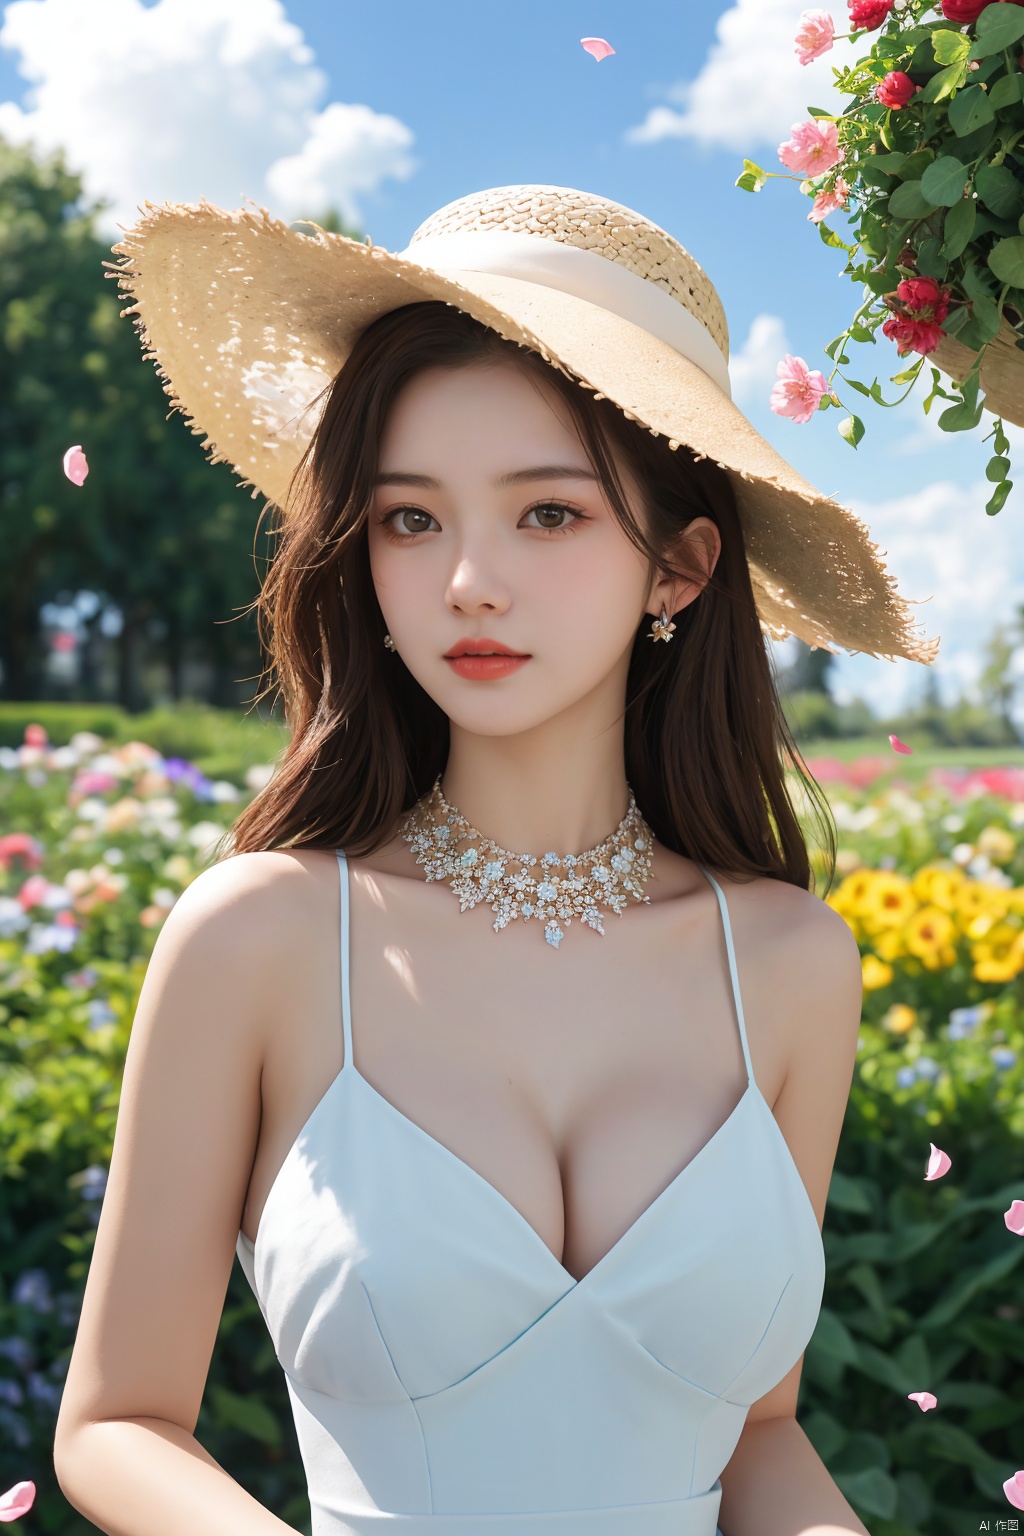 masterpiece, 1 girl, 18 years old, Look at me, long_hair, straw_hat, Wreath, petals, Big breasts, Light blue sky, Clouds, hat_flower, jewelry, Stand, outdoors, Garden, falling_petals, White dress, ajkds, textured skin, super detail, best quality